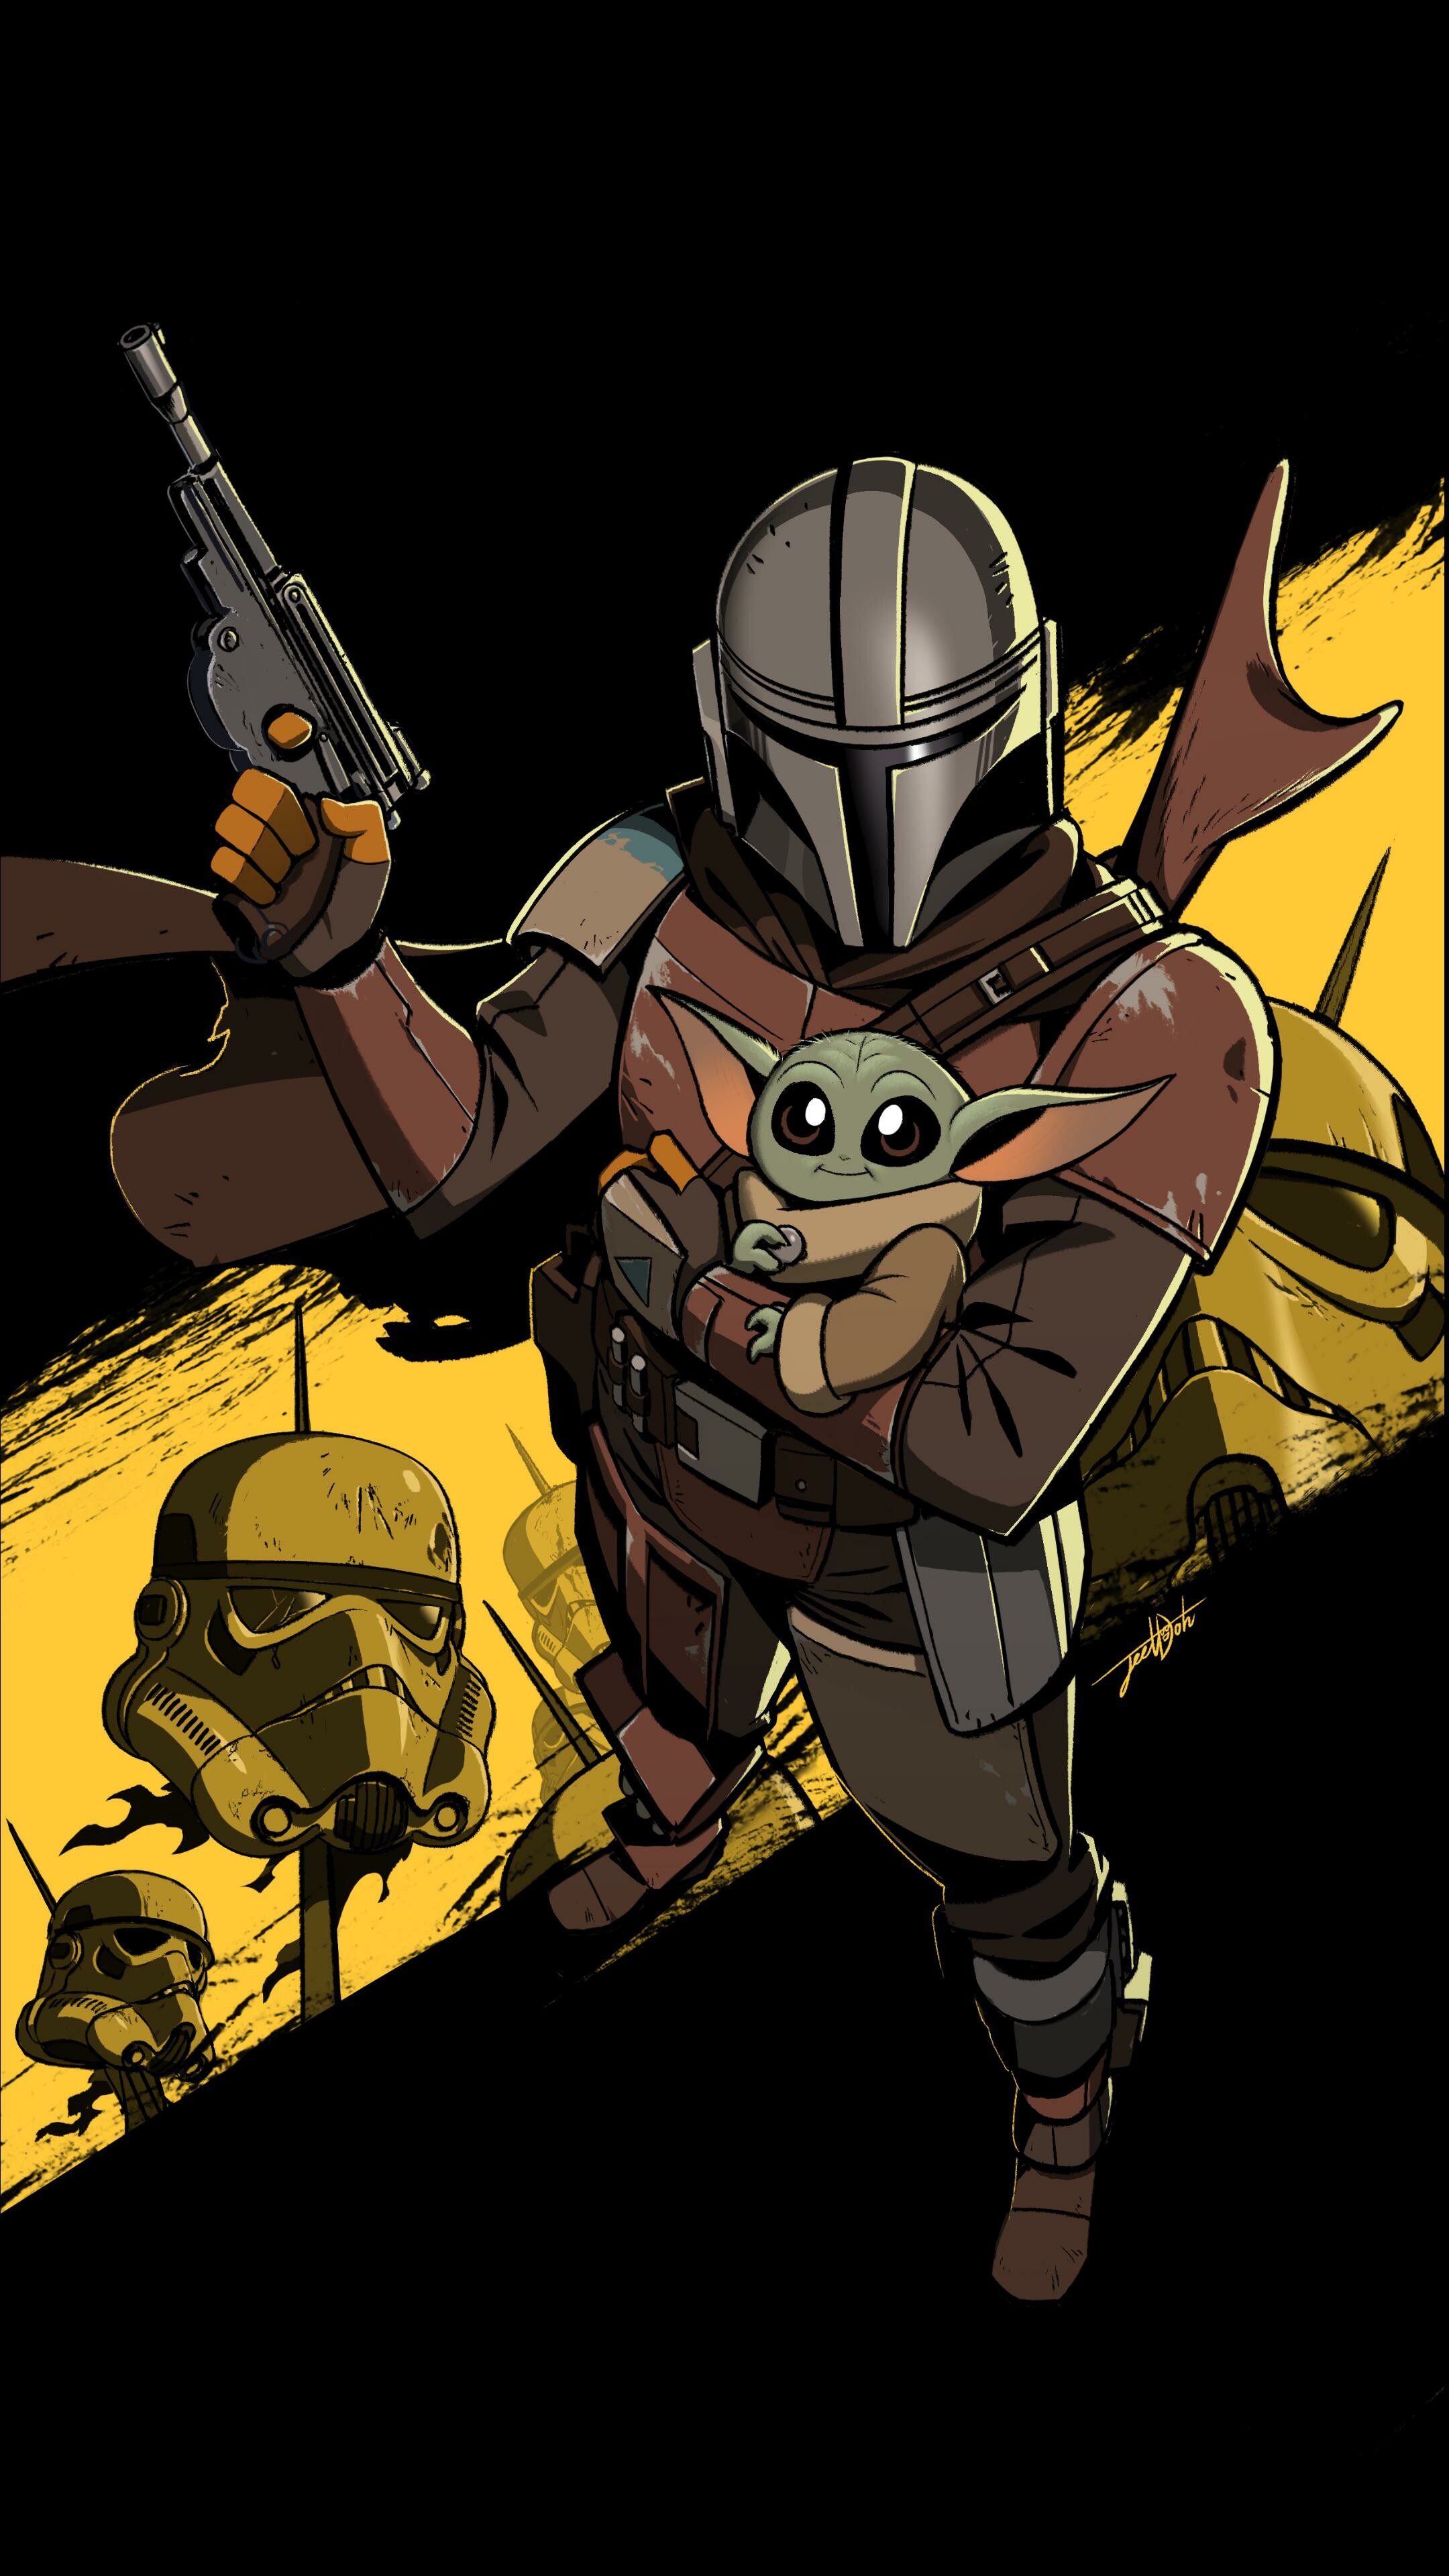 The Mandalorian: He is hired by remnant Imperial forces to retrieve the child Grogu, but instead goes on the run to protect the infant. 2160x3840 4K Wallpaper.